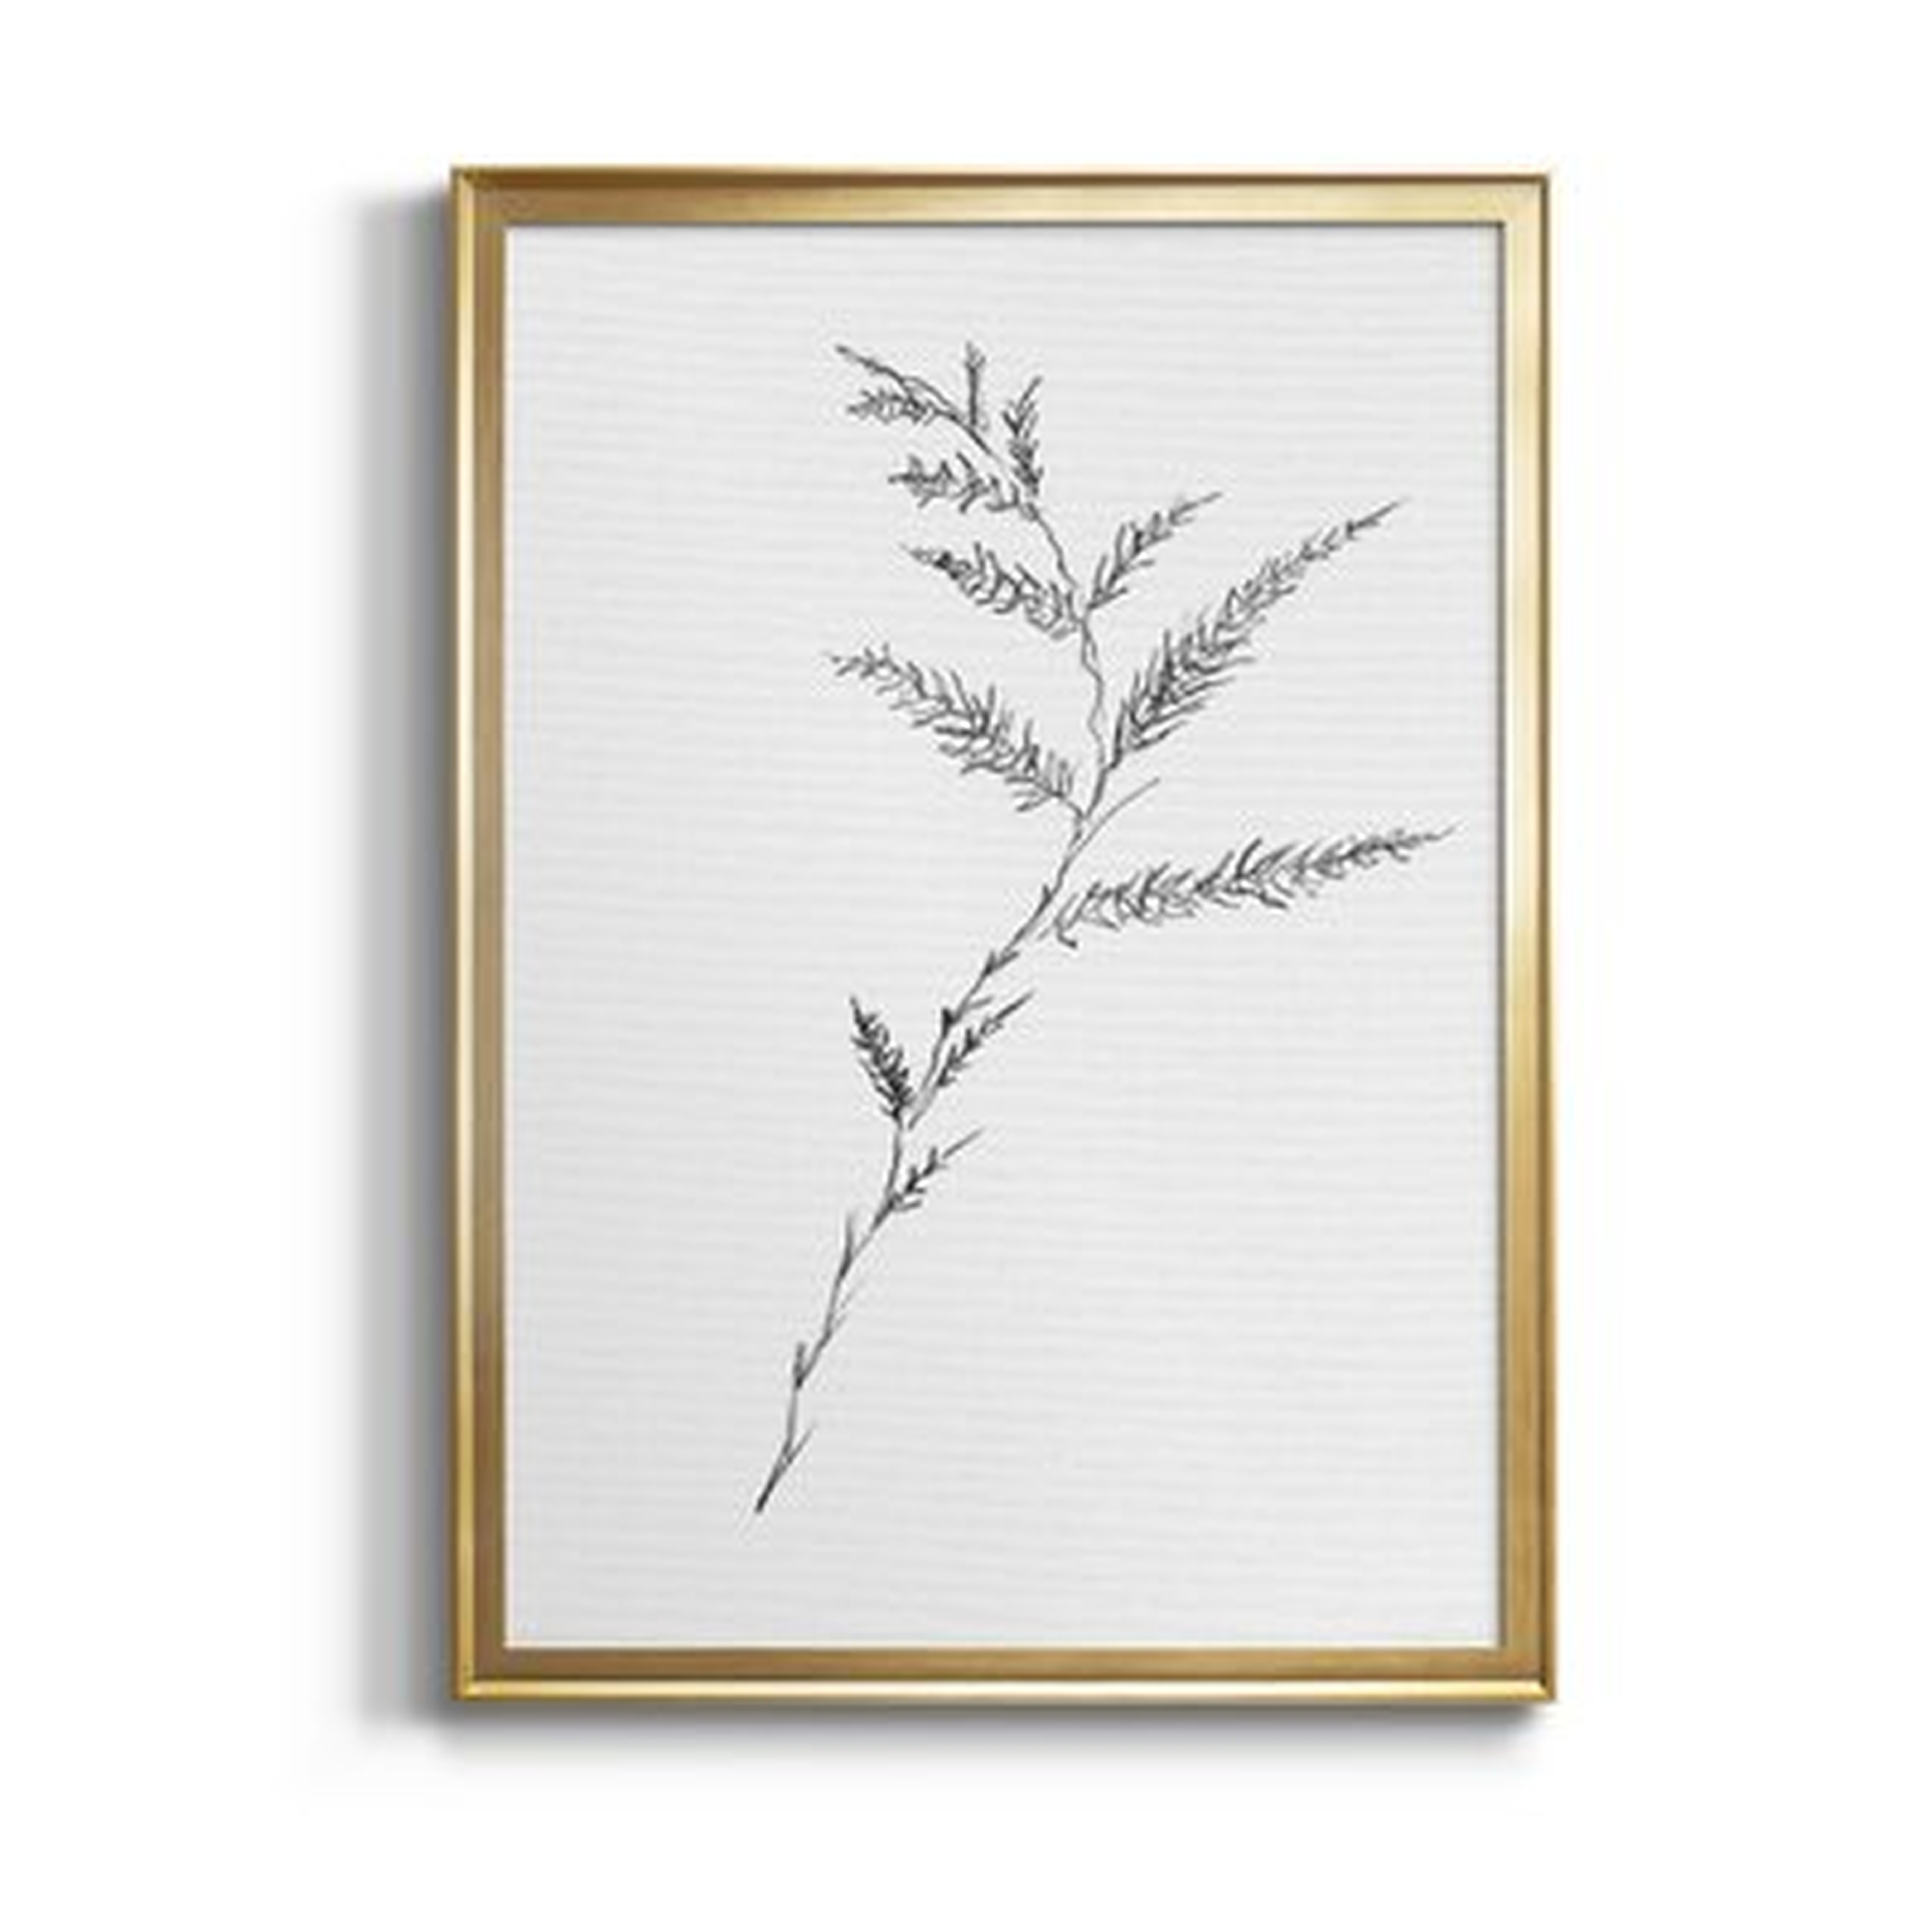 Floral Sketch Iii - Picture Frame Print on Canvas - Wayfair